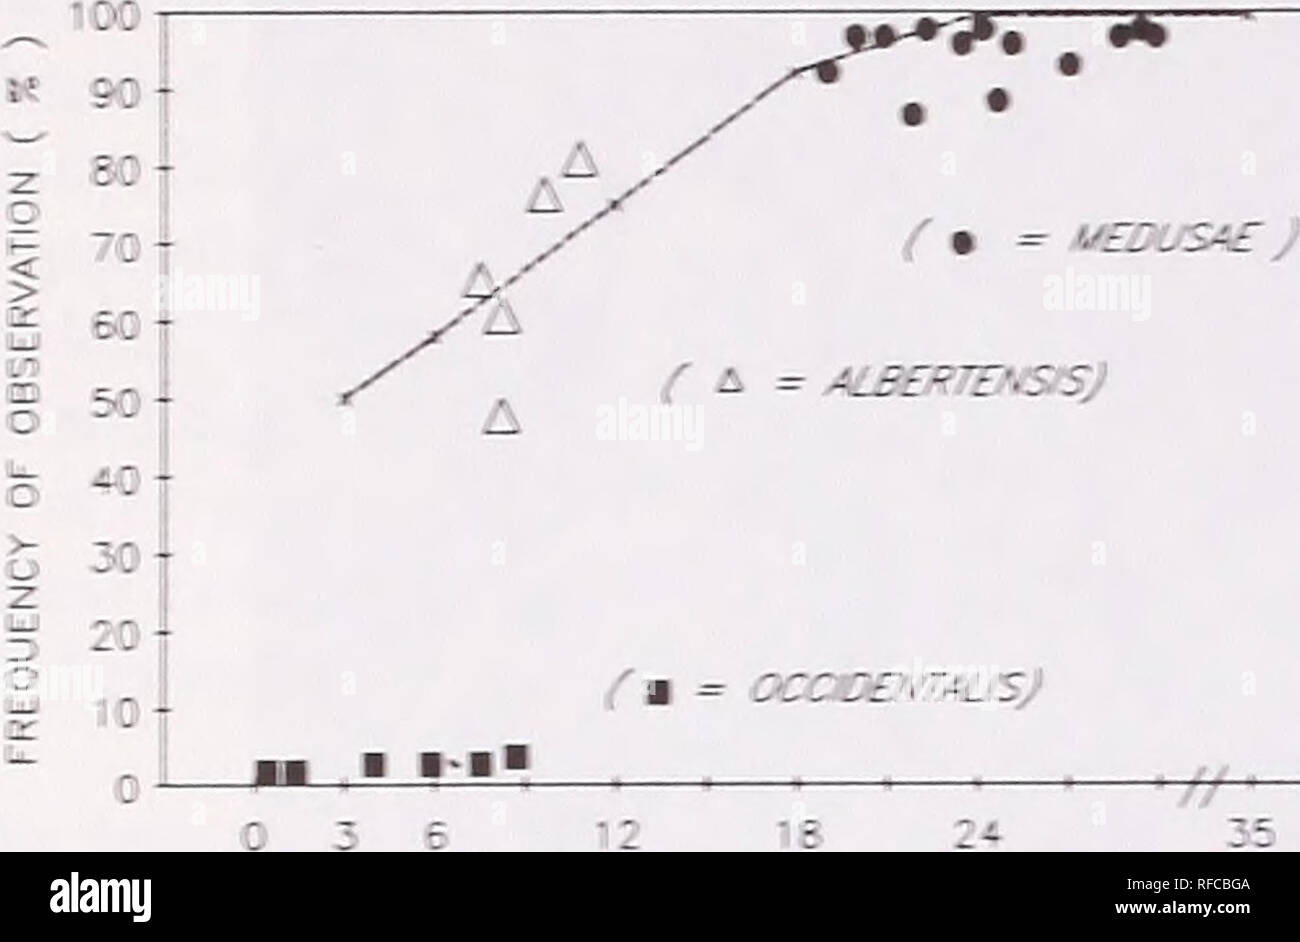 . Recent research on foliage diseases : conference proceedings : Carlisle, Pennsylvania, May 29-June 2, 1989. Leaves Diseases and pests United States Congresses. RELATION OF SIZE OF BALD SPOT AND FREQUENCY OF VISIBILITY IN SIM PHOTOS 3F 7-.III SPORES. s--z . z: - A I (A = atertensrs J I ^ A | -  8 fO= abietis-conoxtensis J s ;:- o I J ( ocddentafs )         r'Y.T &quot;    abietis-canadensis, tw o were found in 1981 in Wis- consin, and five were found in 1982, three from Wisconsin and one each from Michigan and North Dakota, Melampsora abiens-canadensis was not found in Minnesota collecti Stock Photo